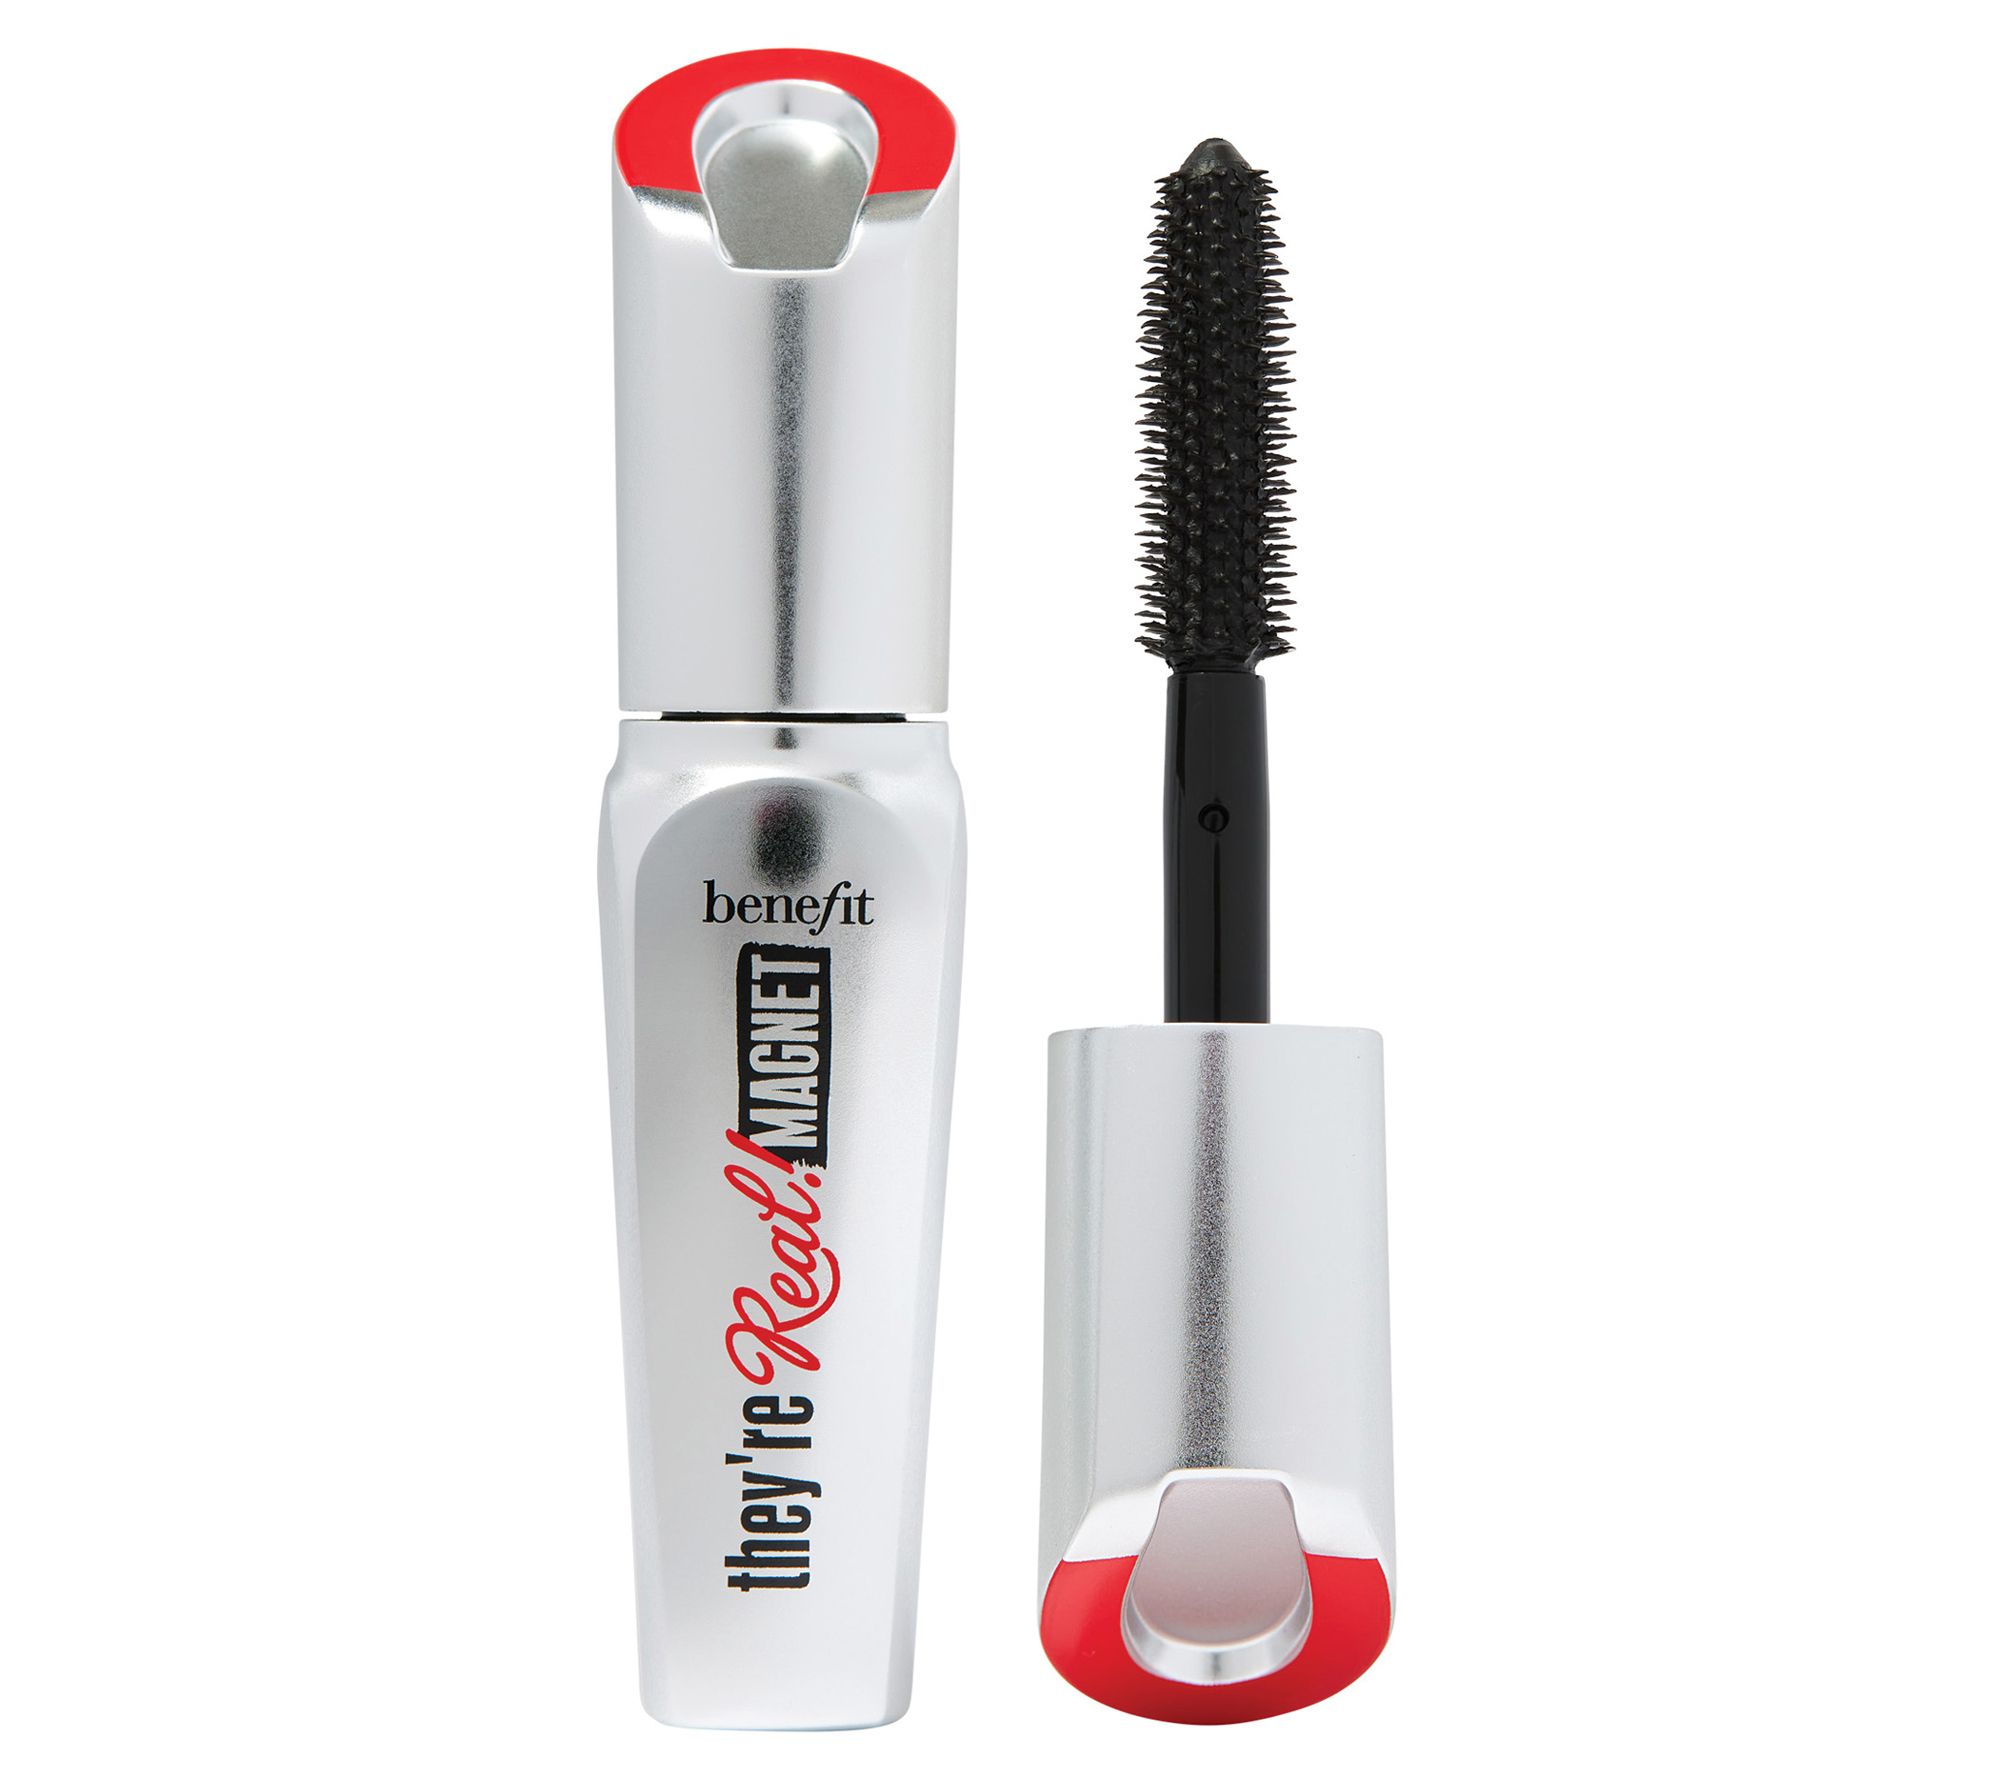 Benefit They're Real! Magnet Extreme Mascara Mini -